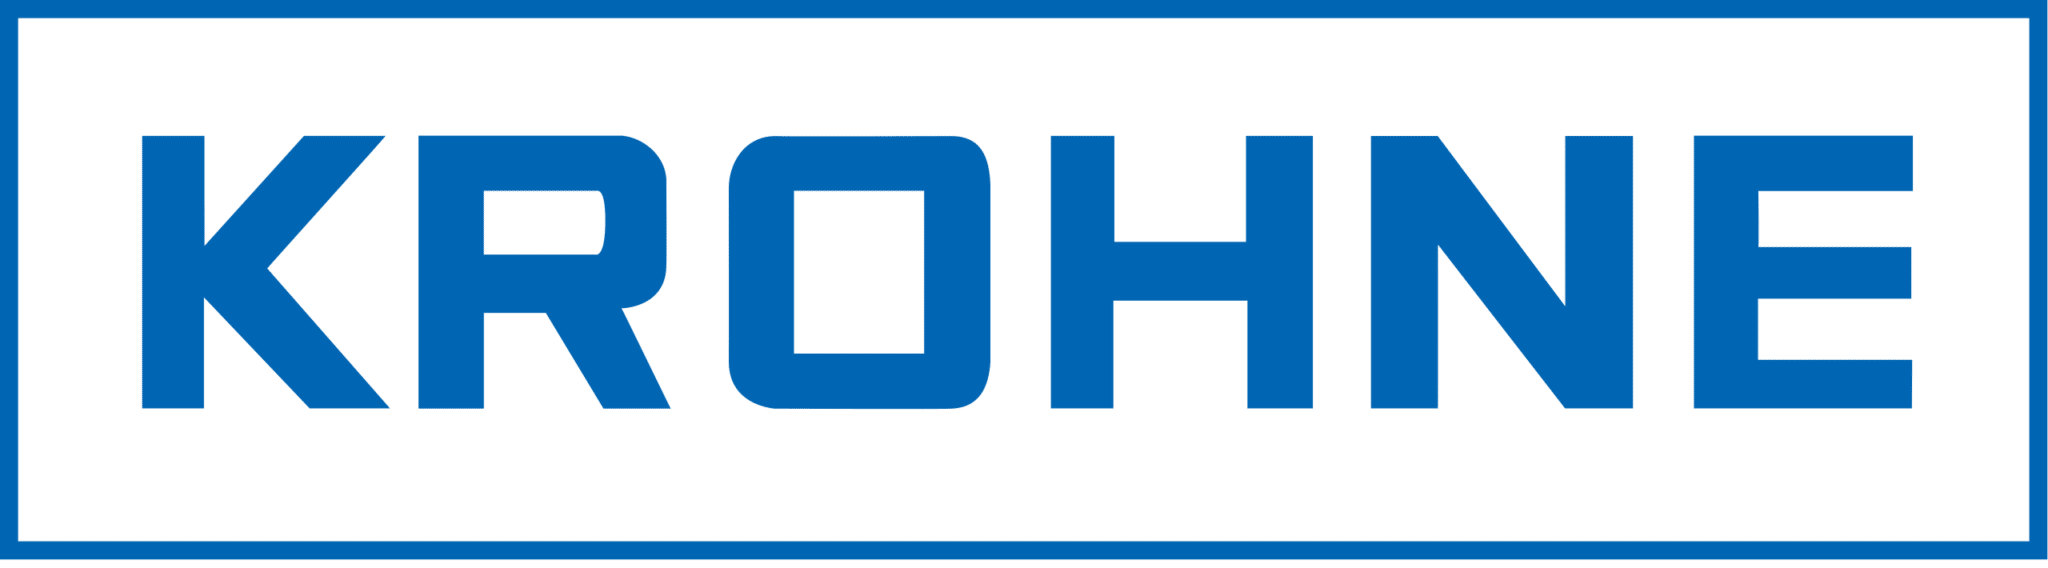 Krohne logo in blue letters surrounded by a blue line rectangle.